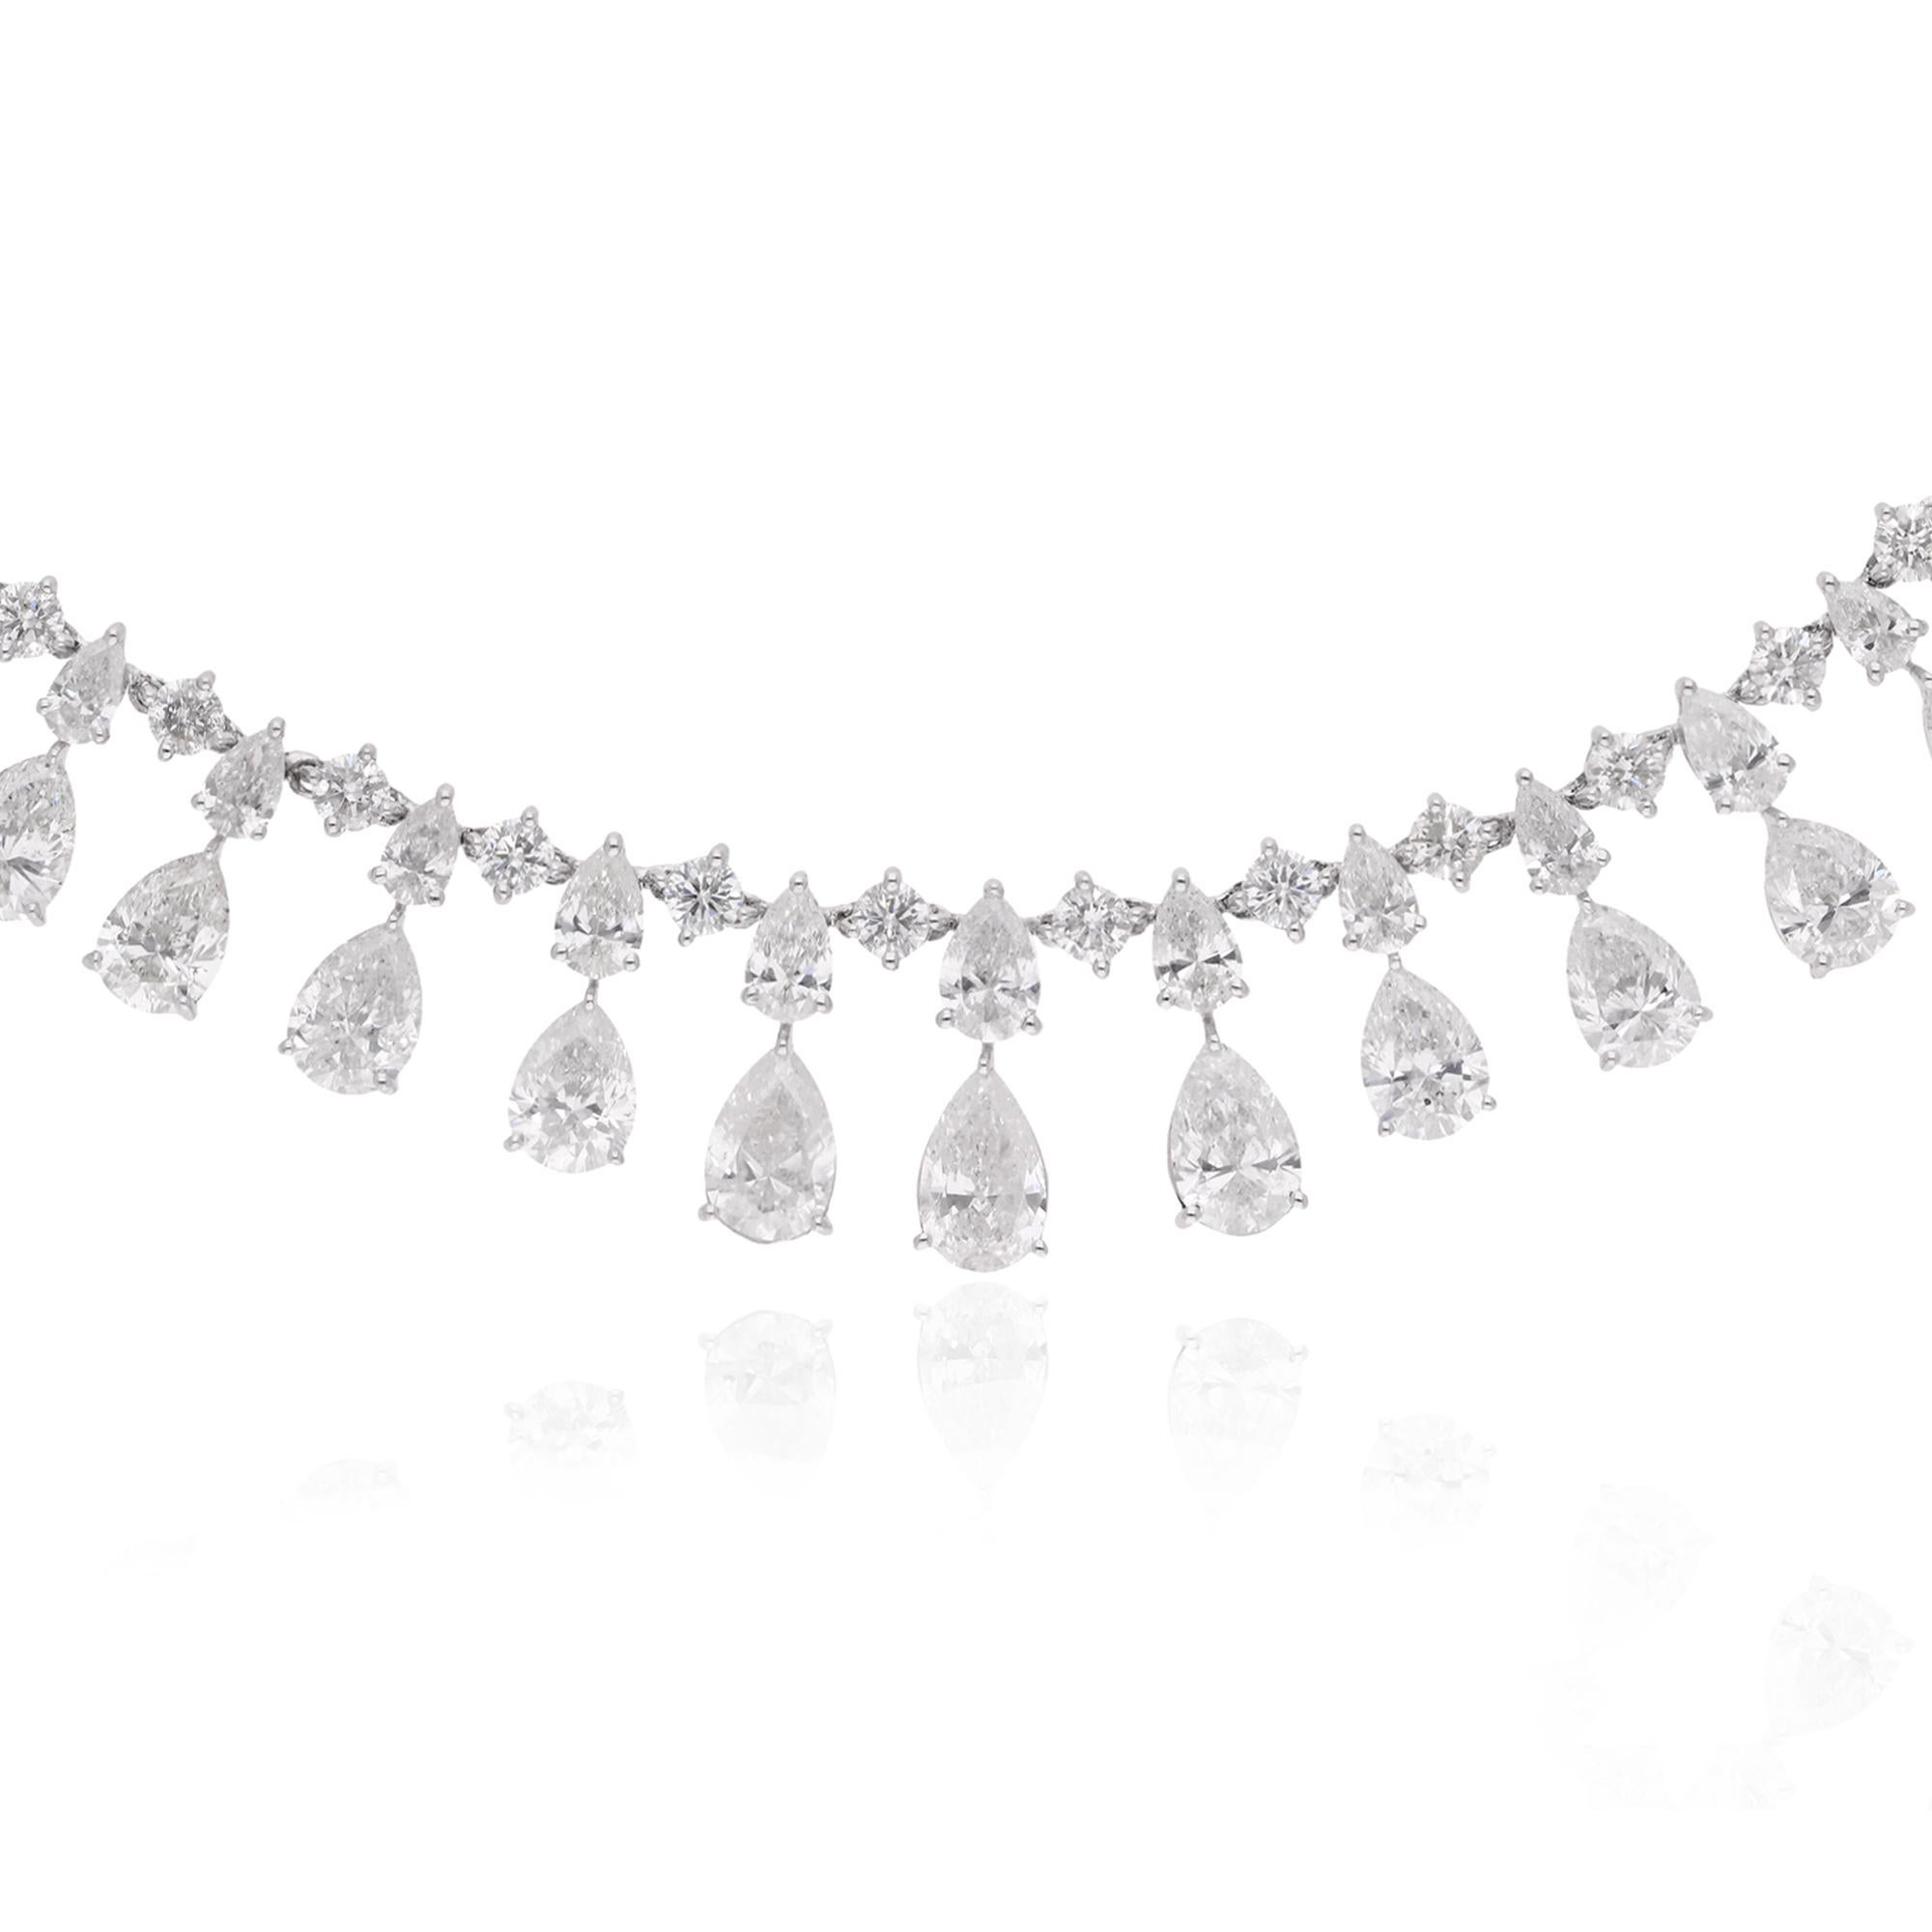 At the heart of this stunning necklace lies a magnificent pear-shaped diamond, captivating with its brilliant sparkle and graceful silhouette. Surrounding it are a delicate array of round diamonds, each meticulously set to enhance the overall